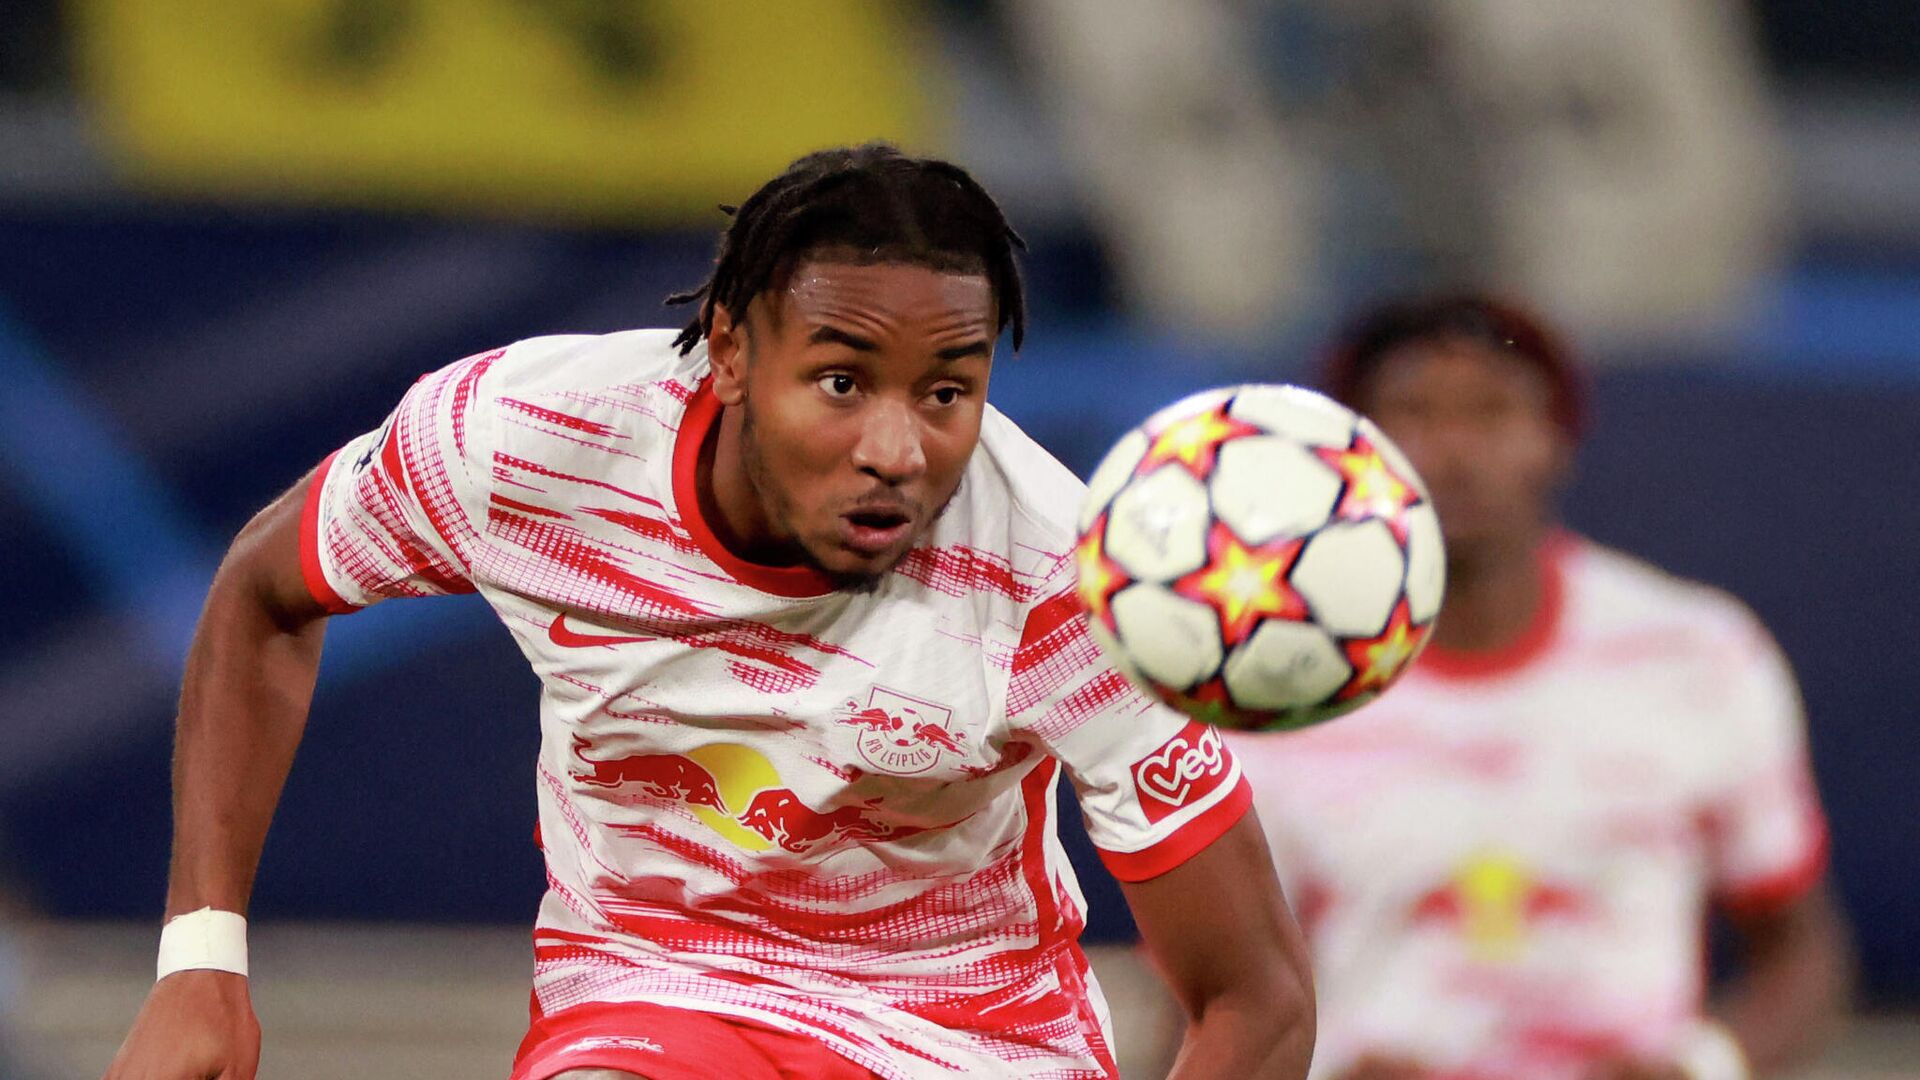 Leipzig's French midfielder Christopher Nkunku plays the ball during the UEFA Champions League Group A football match RB Leipzig v Club Brugge in Leipzig, eastern Germany, on September 28, 2021. (Photo by Odd ANDERSEN / AFP) - РИА Новости, 1920, 02.10.2021